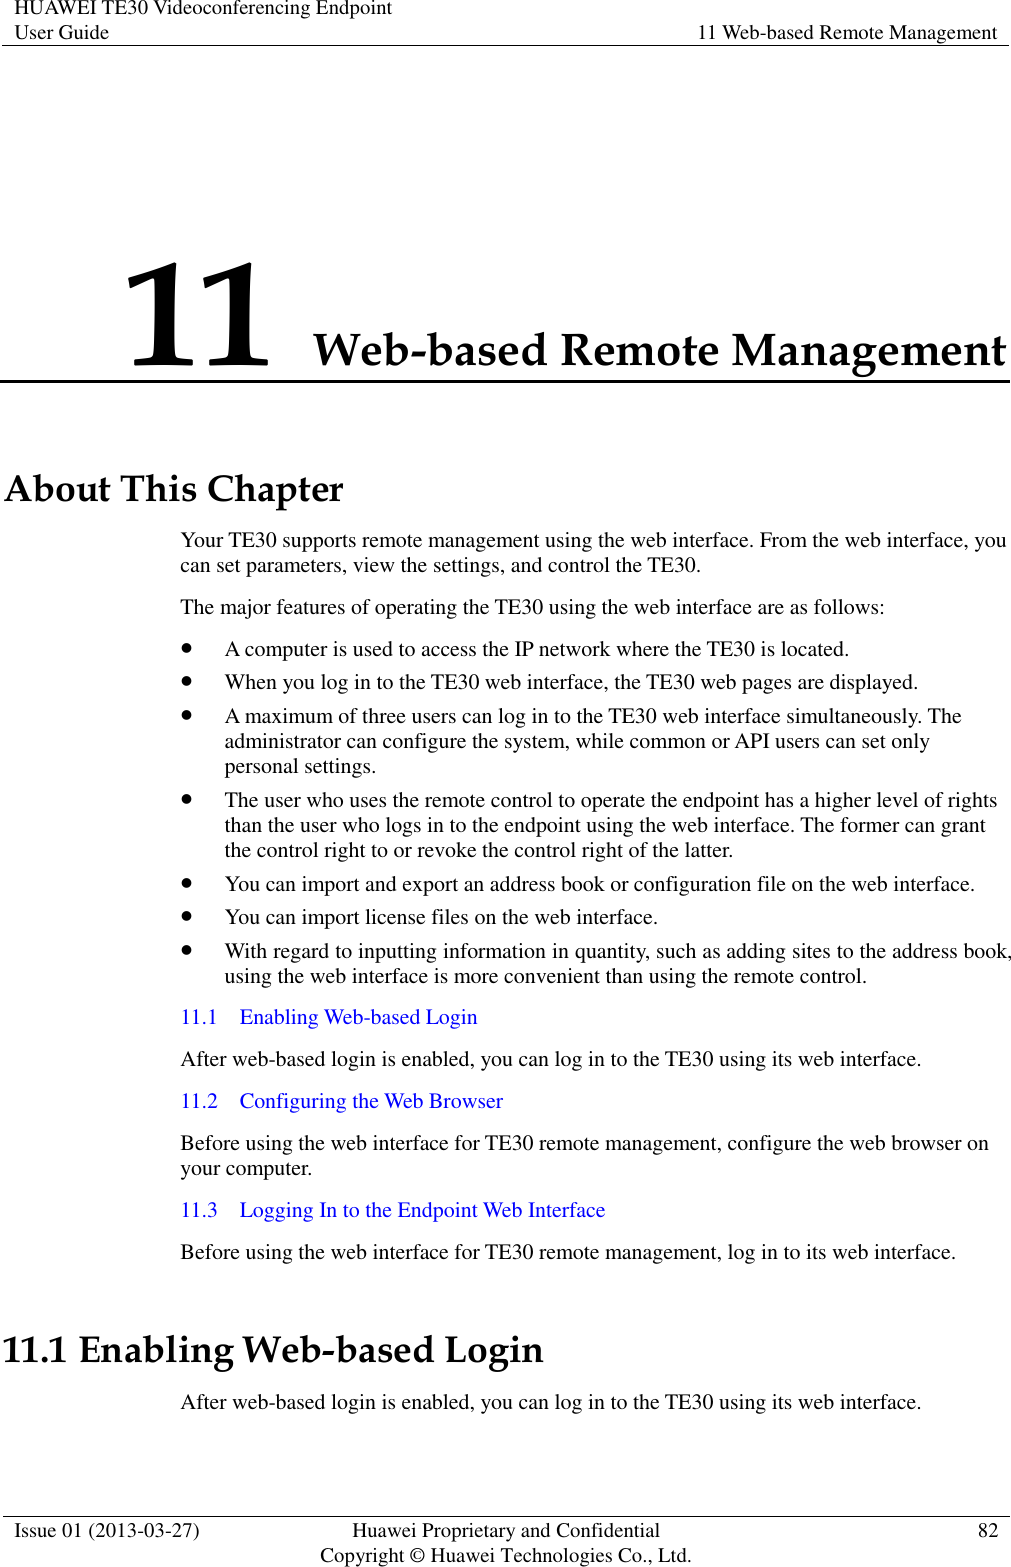 HUAWEI TE30 Videoconferencing Endpoint User Guide 11 Web-based Remote Management  Issue 01 (2013-03-27) Huawei Proprietary and Confidential                                     Copyright © Huawei Technologies Co., Ltd. 82  11 Web-based Remote Management About This Chapter Your TE30 supports remote management using the web interface. From the web interface, you can set parameters, view the settings, and control the TE30.   The major features of operating the TE30 using the web interface are as follows:  A computer is used to access the IP network where the TE30 is located.  When you log in to the TE30 web interface, the TE30 web pages are displayed.  A maximum of three users can log in to the TE30 web interface simultaneously. The administrator can configure the system, while common or API users can set only personal settings.  The user who uses the remote control to operate the endpoint has a higher level of rights than the user who logs in to the endpoint using the web interface. The former can grant the control right to or revoke the control right of the latter.  You can import and export an address book or configuration file on the web interface.  You can import license files on the web interface.  With regard to inputting information in quantity, such as adding sites to the address book, using the web interface is more convenient than using the remote control. 11.1    Enabling Web-based Login After web-based login is enabled, you can log in to the TE30 using its web interface. 11.2    Configuring the Web Browser Before using the web interface for TE30 remote management, configure the web browser on your computer. 11.3    Logging In to the Endpoint Web Interface Before using the web interface for TE30 remote management, log in to its web interface.   11.1 Enabling Web-based Login After web-based login is enabled, you can log in to the TE30 using its web interface. 